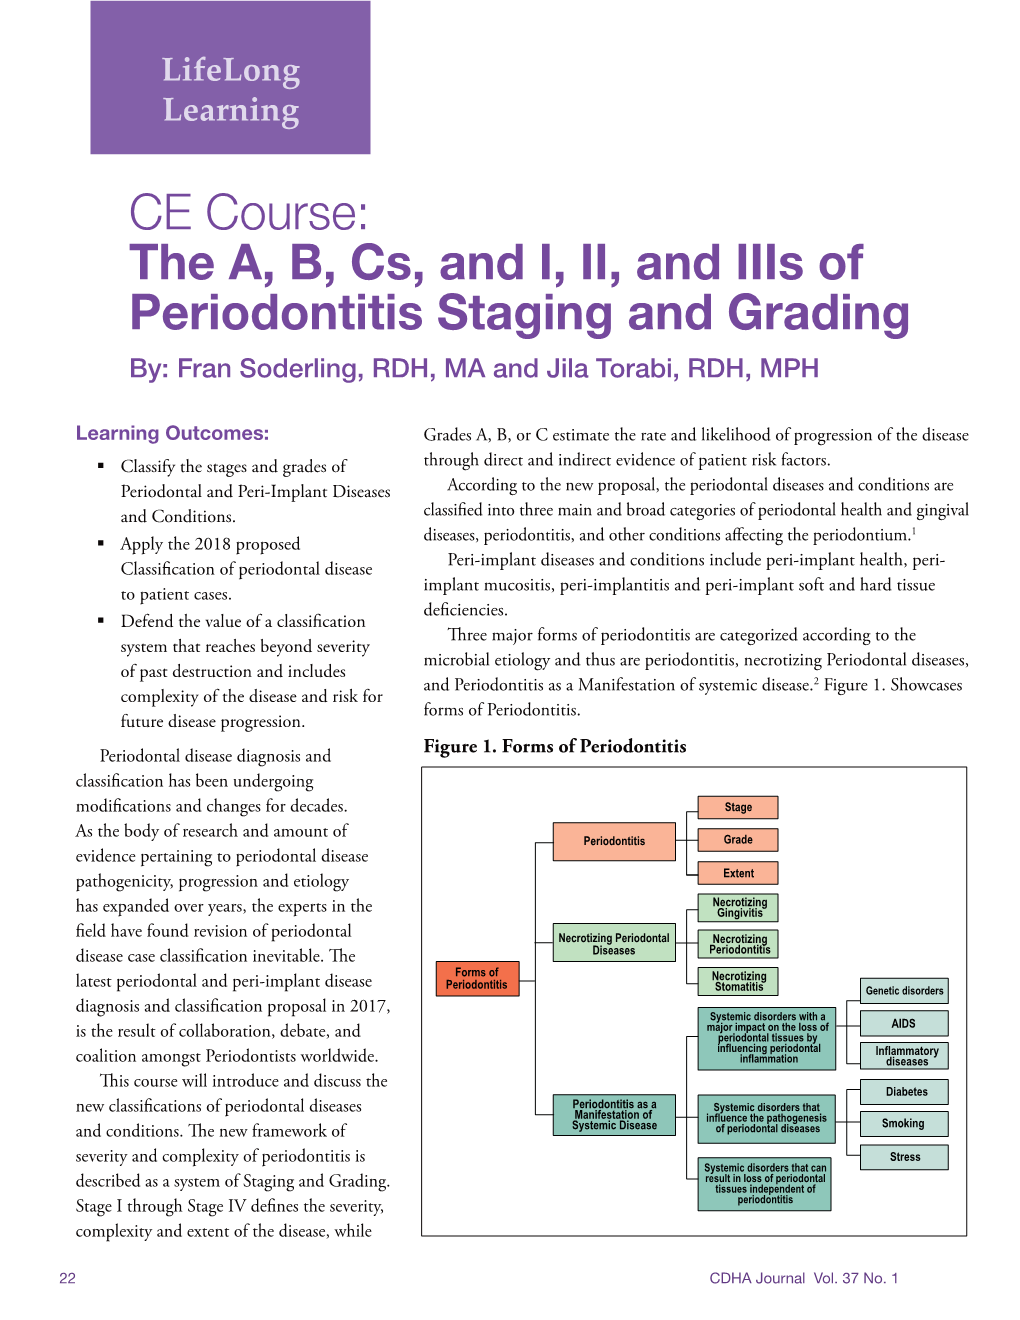 The A, B, Cs, and I, II, and Iiis of Periodontitis Staging and Grading By: Fran Soderling, RDH, MA and Jila Torabi, RDH, MPH